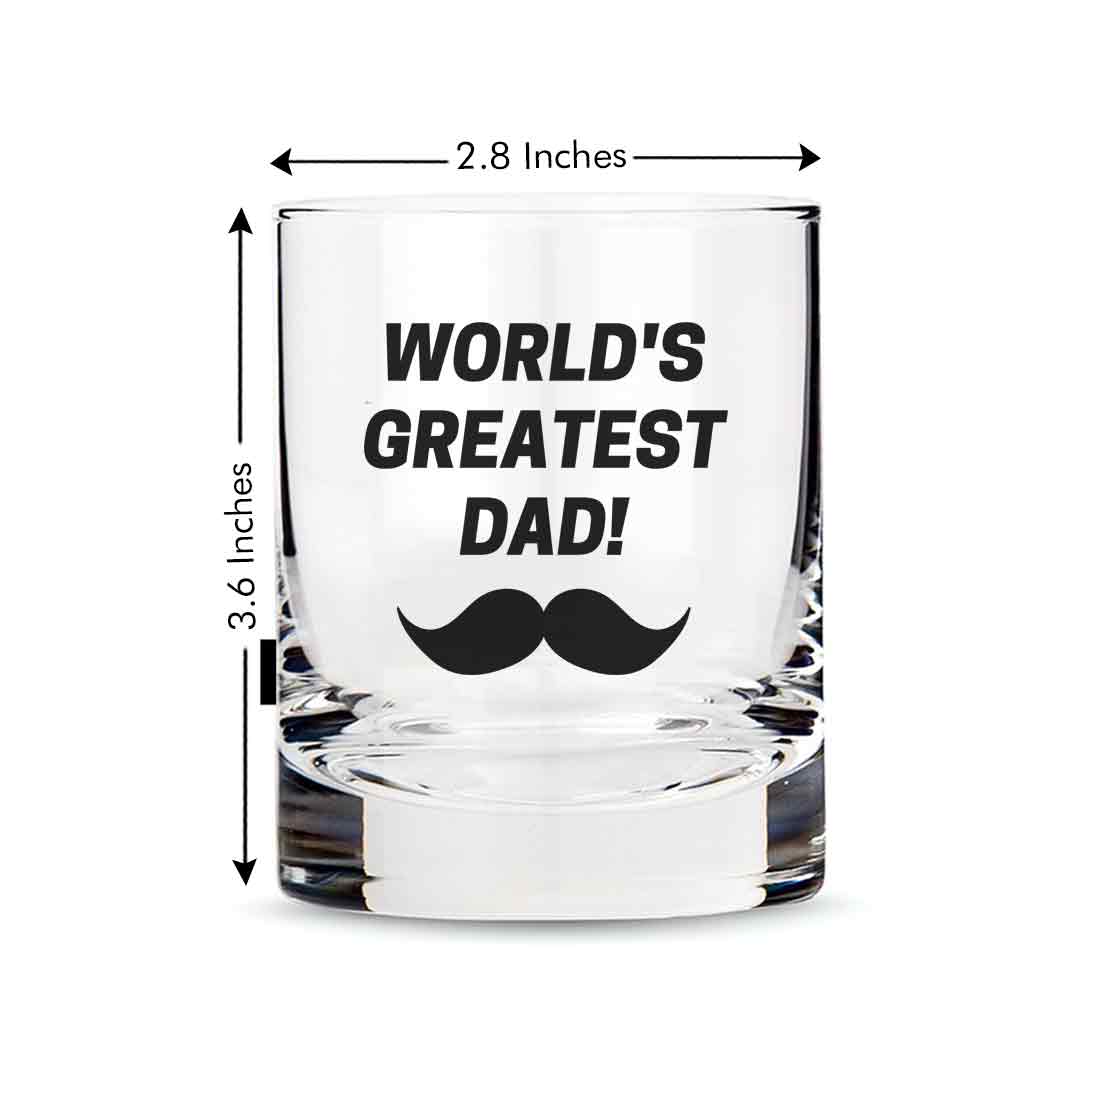 Indigifts Decorative Gift Items Gift for Father in Law, Fathers Birthday  Gift, Parents Anniversary, Dad, Fathers Day Gifts, S-MUGCRWH01RO11-ILF17005  Ceramic Coffee Mug Price in India - Buy Indigifts Decorative Gift Items Gift